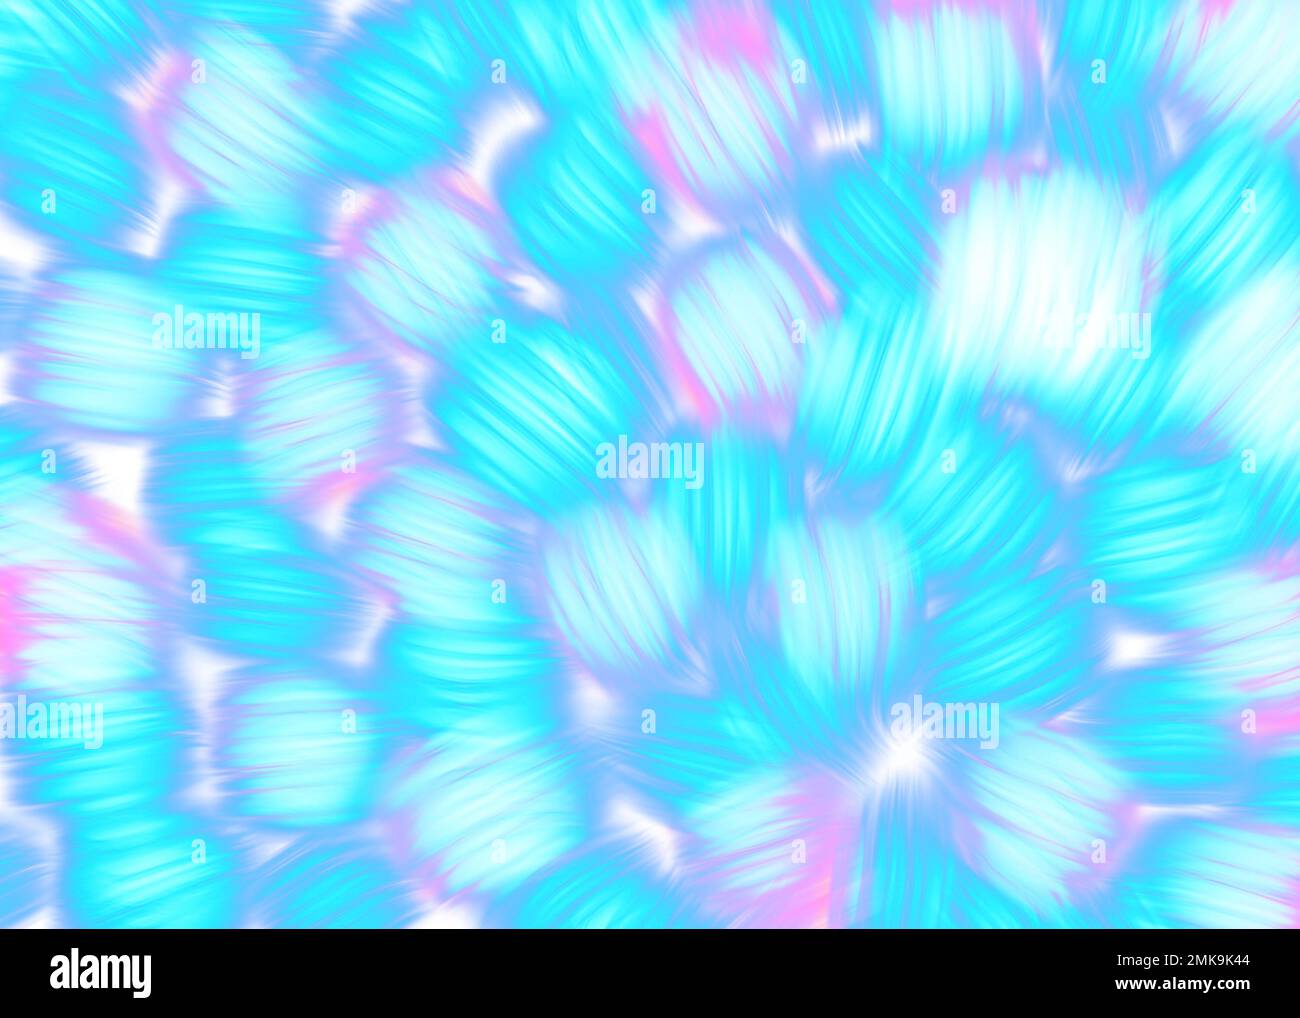 Colorful neon psychedelic background made of interweaving curved brushstrokes shapes.  Stock Photo